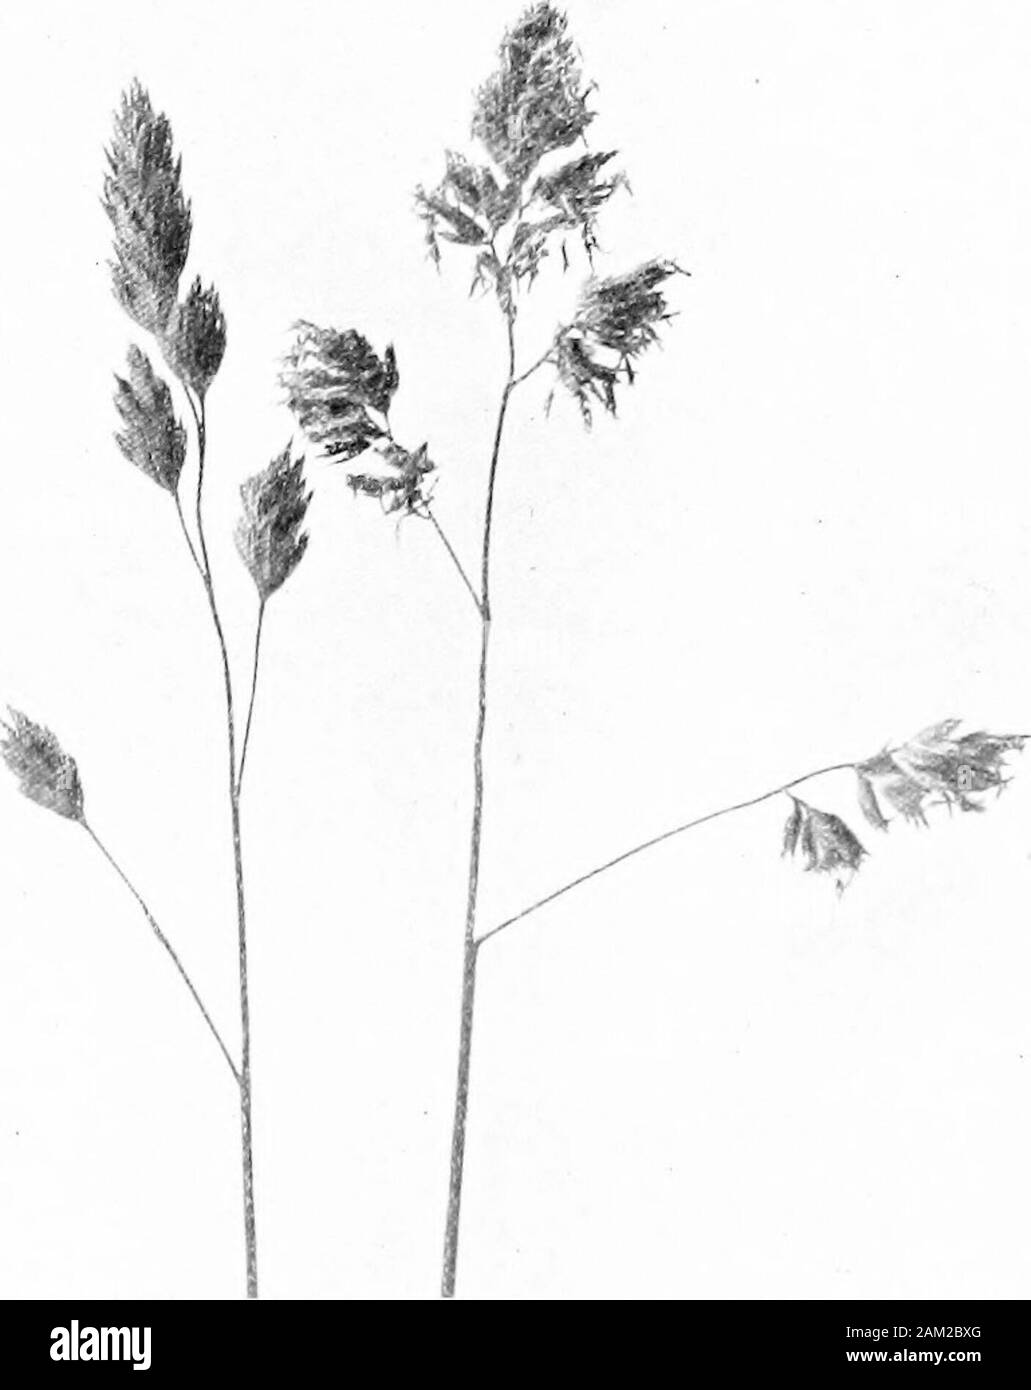 British grasses and their employment in agriculture . Fig. 86. Seedof Gynosuruscristatus. /. 10.Front view. Fig. 85. Spike-like inflorescences of Gynosuruscristatus shown in full flower. About twicenatural size. Flowers late in June or early in July. The culm is thin, smoothand wiry, from nine to fifteen inches high. Panicle spikedike,1 to 2 inches long, simple, bearing the spikelets in clusters on itswavy axis. About one-fourth of this axis (rachis) is left exposedowing to the clusters of spikelets being all turned towards oneside. Spikelets, 3-5 flowered, each subtended by a group of 92 Bota Stock Photo